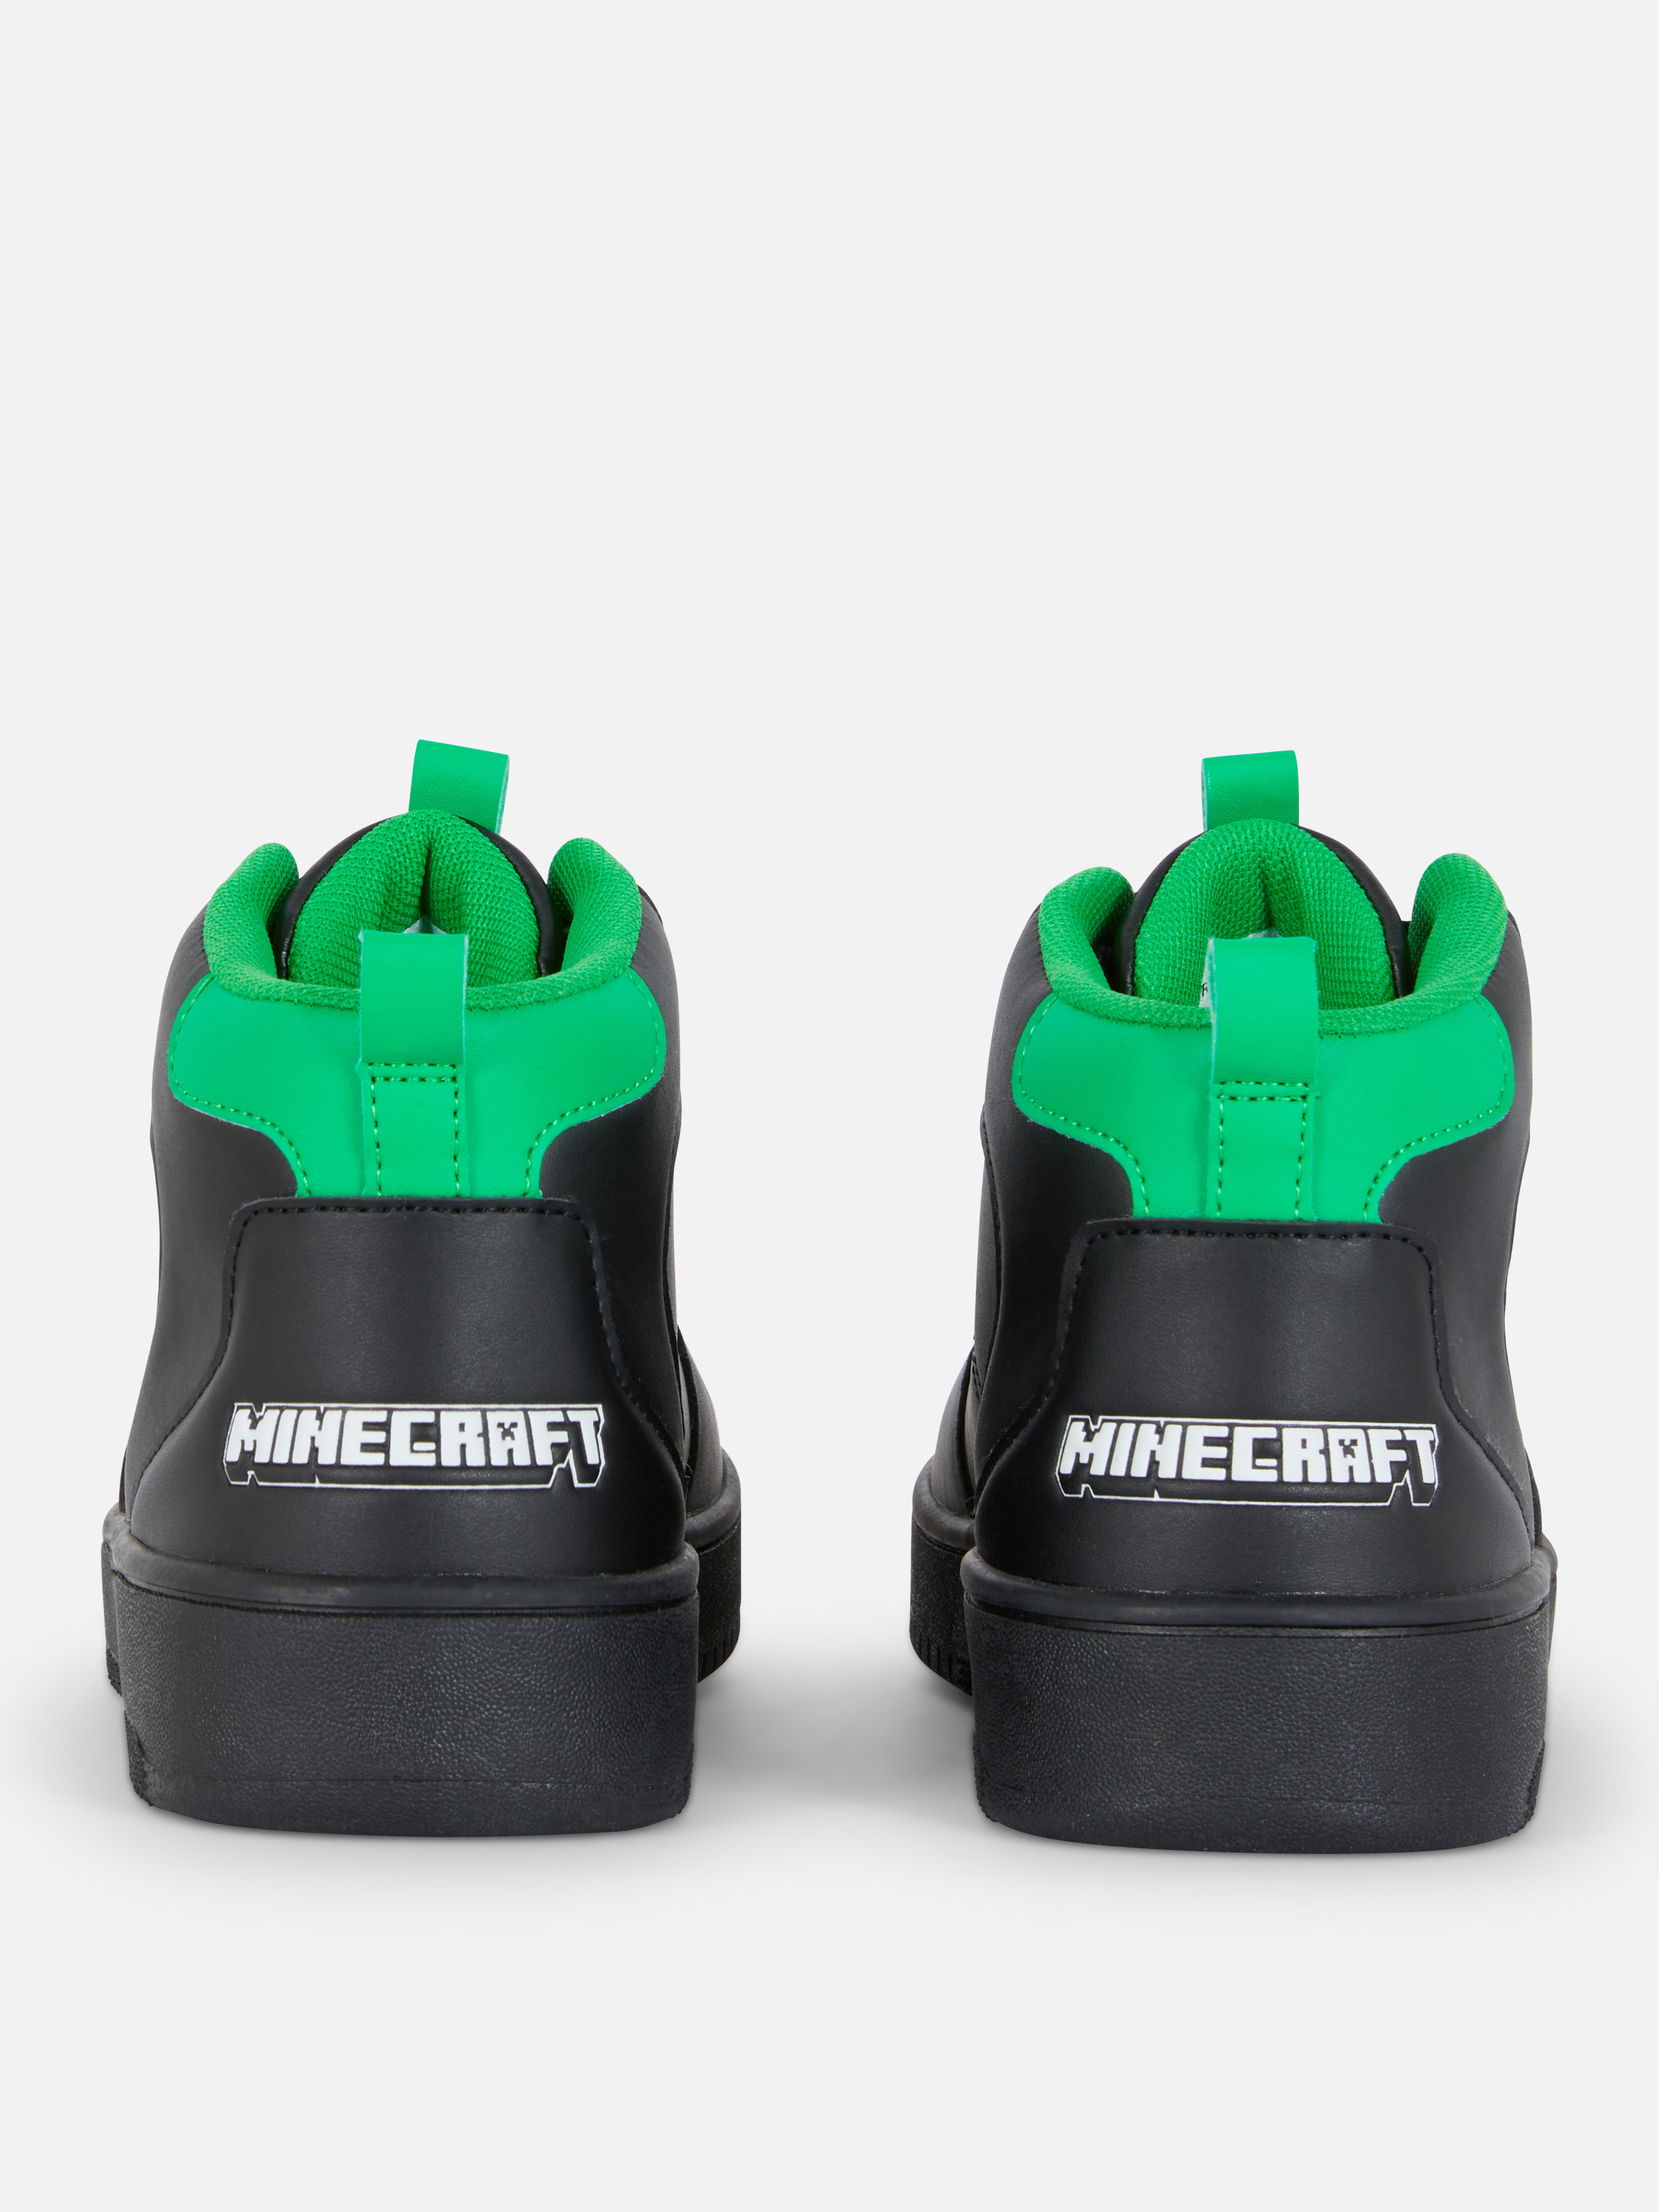 Minecraft High-Top Trainers